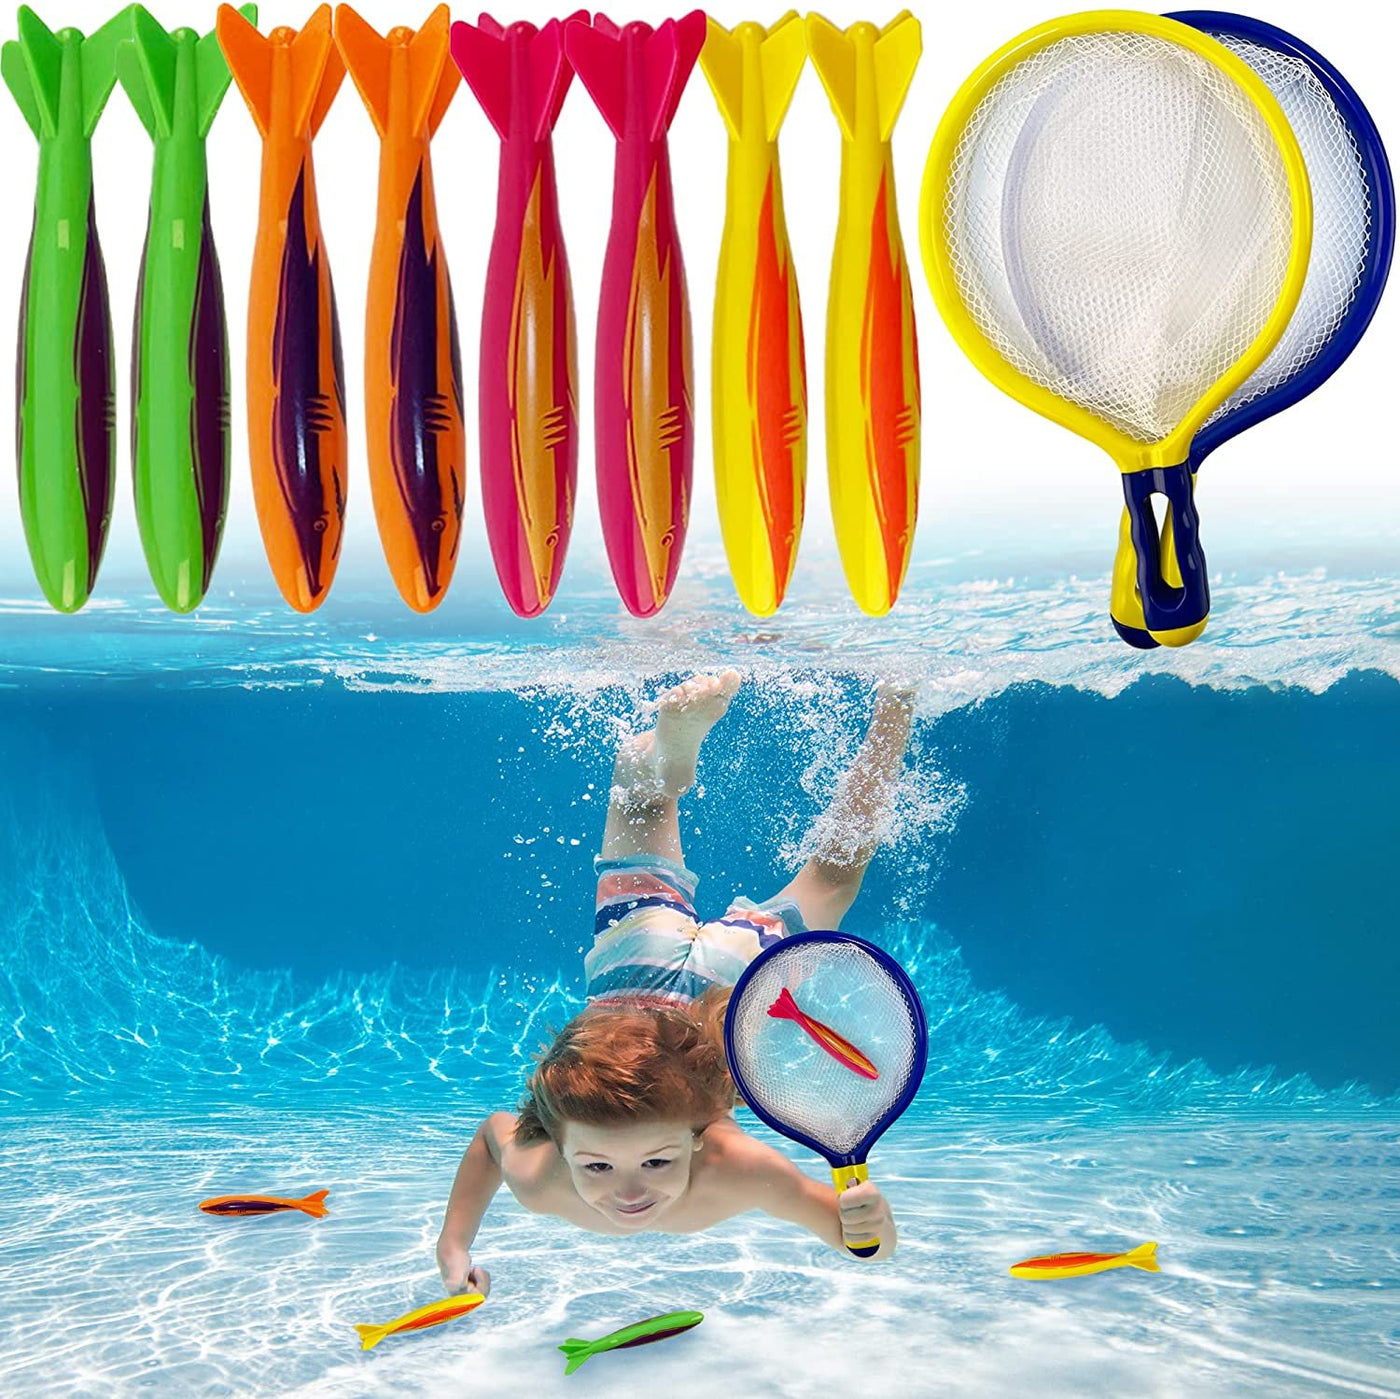 Pool Diving Game for Kids, Underwater Fishing Set with 8 Torpedo